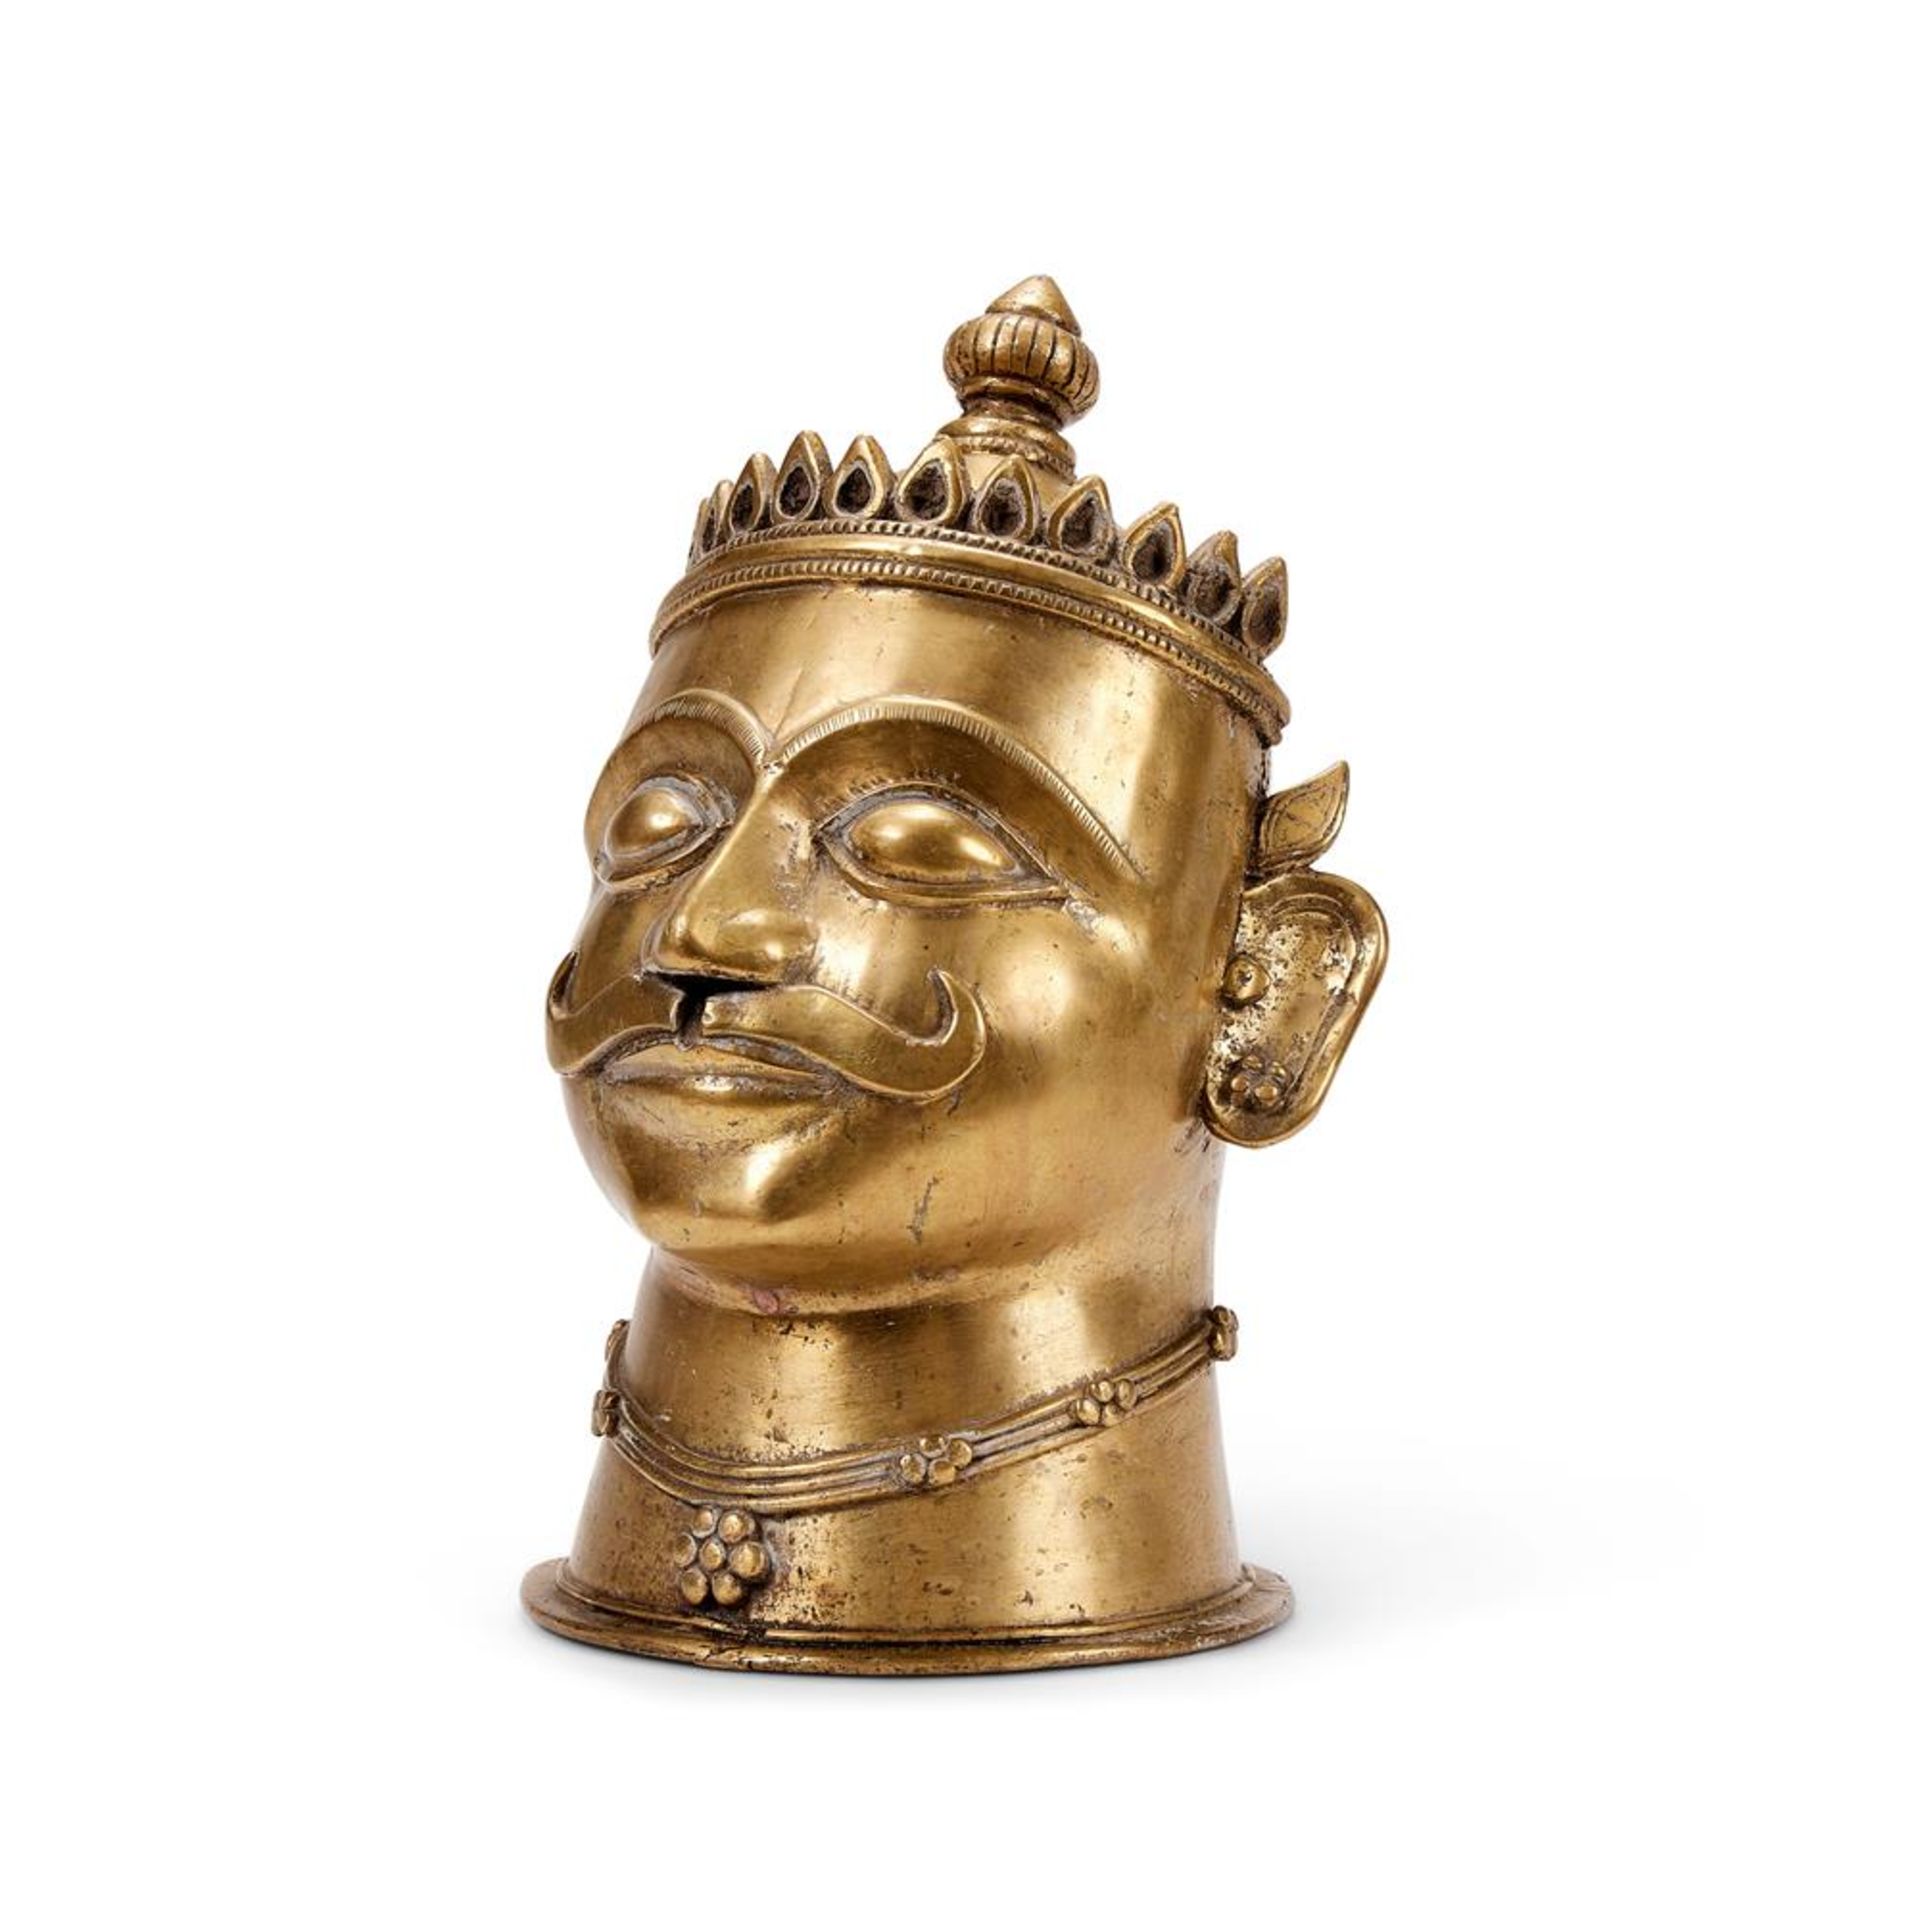 AN INDIAN BRASS STUPA COVER, LATE 19TH/EARLY 20TH CENTURY